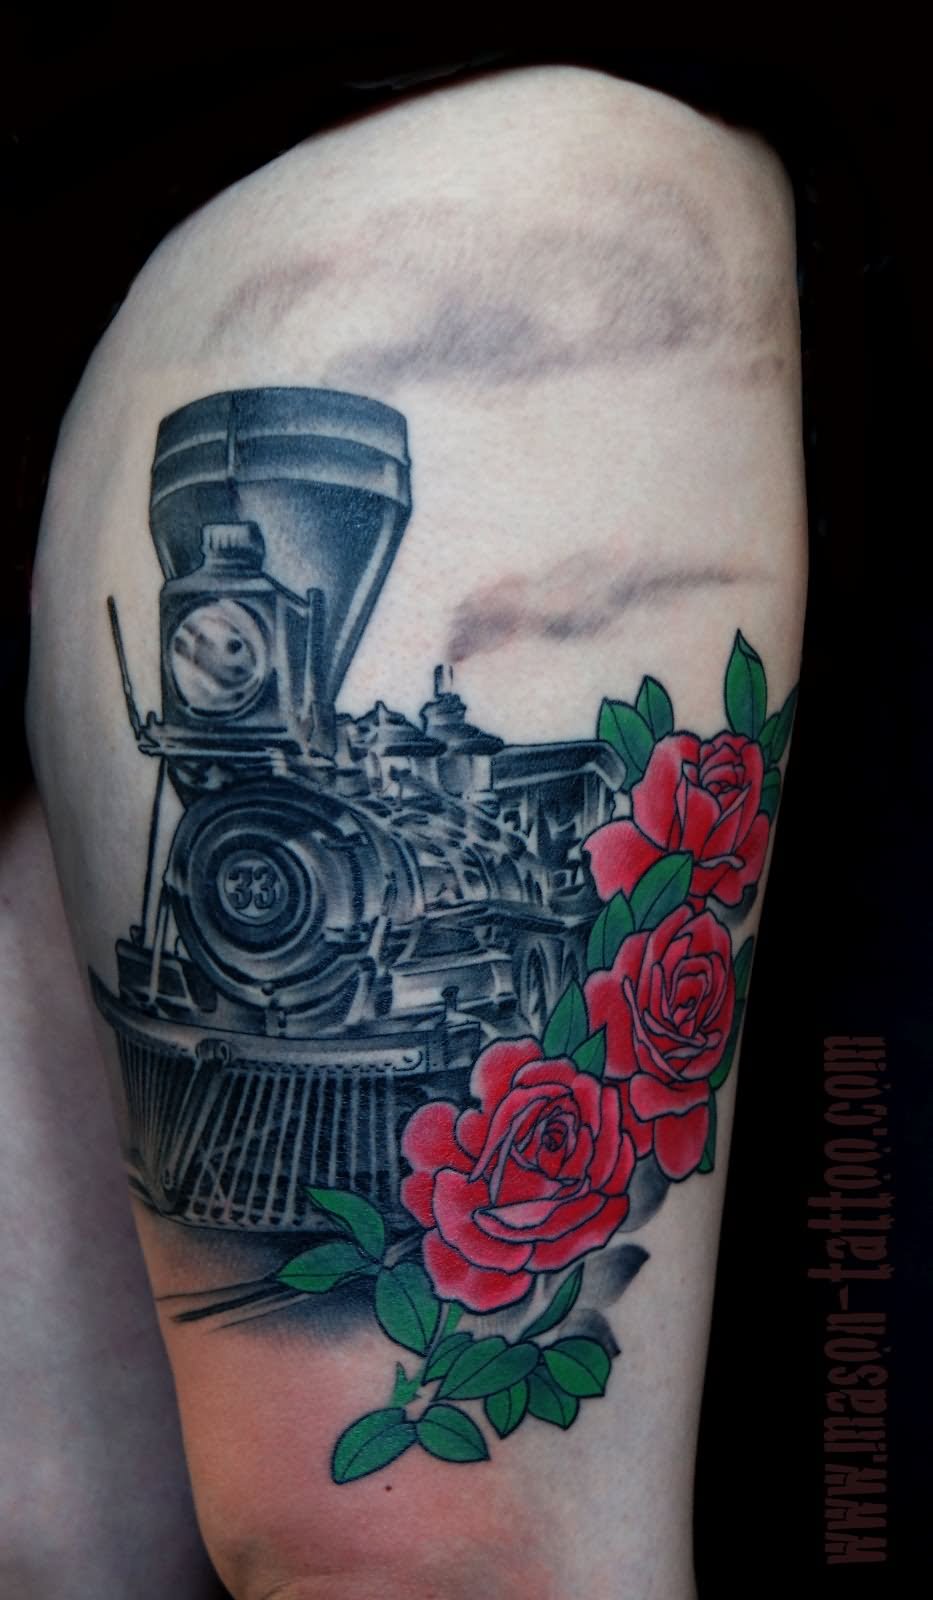 Black Ink Old Train With Red Roses Tattoo Design For Thigh